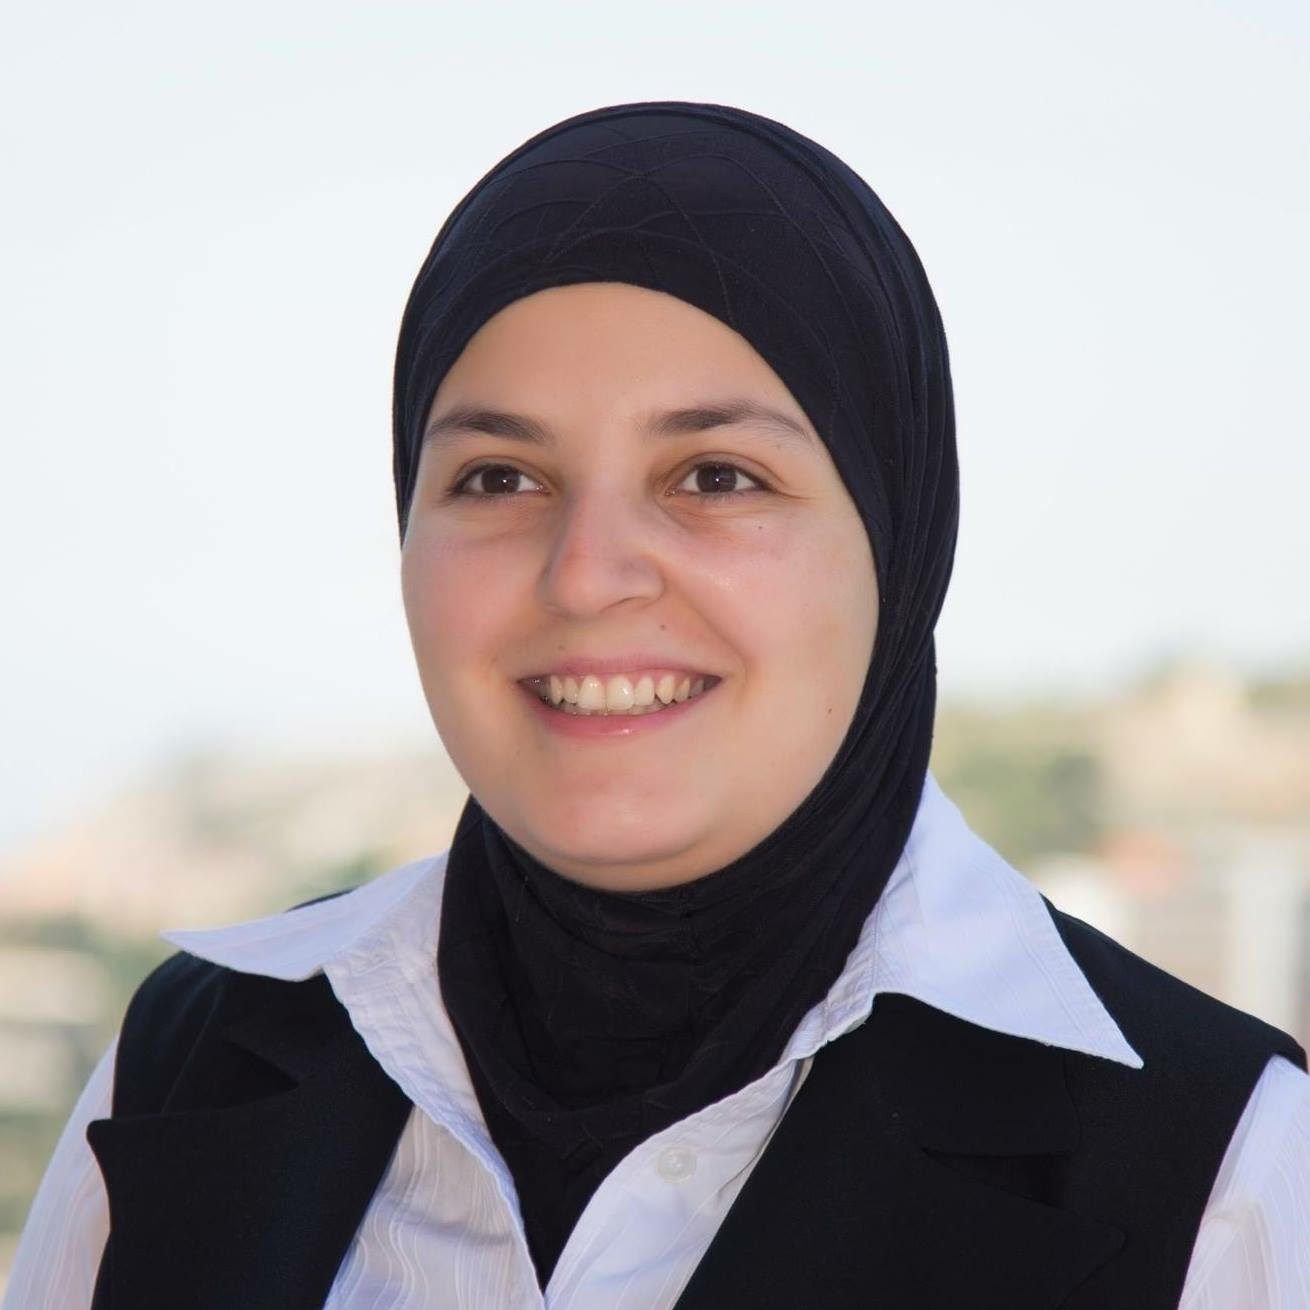 Mona, standing outdoors, wears a black hijab and white button-down-shirt and smiles broadly for the camera.